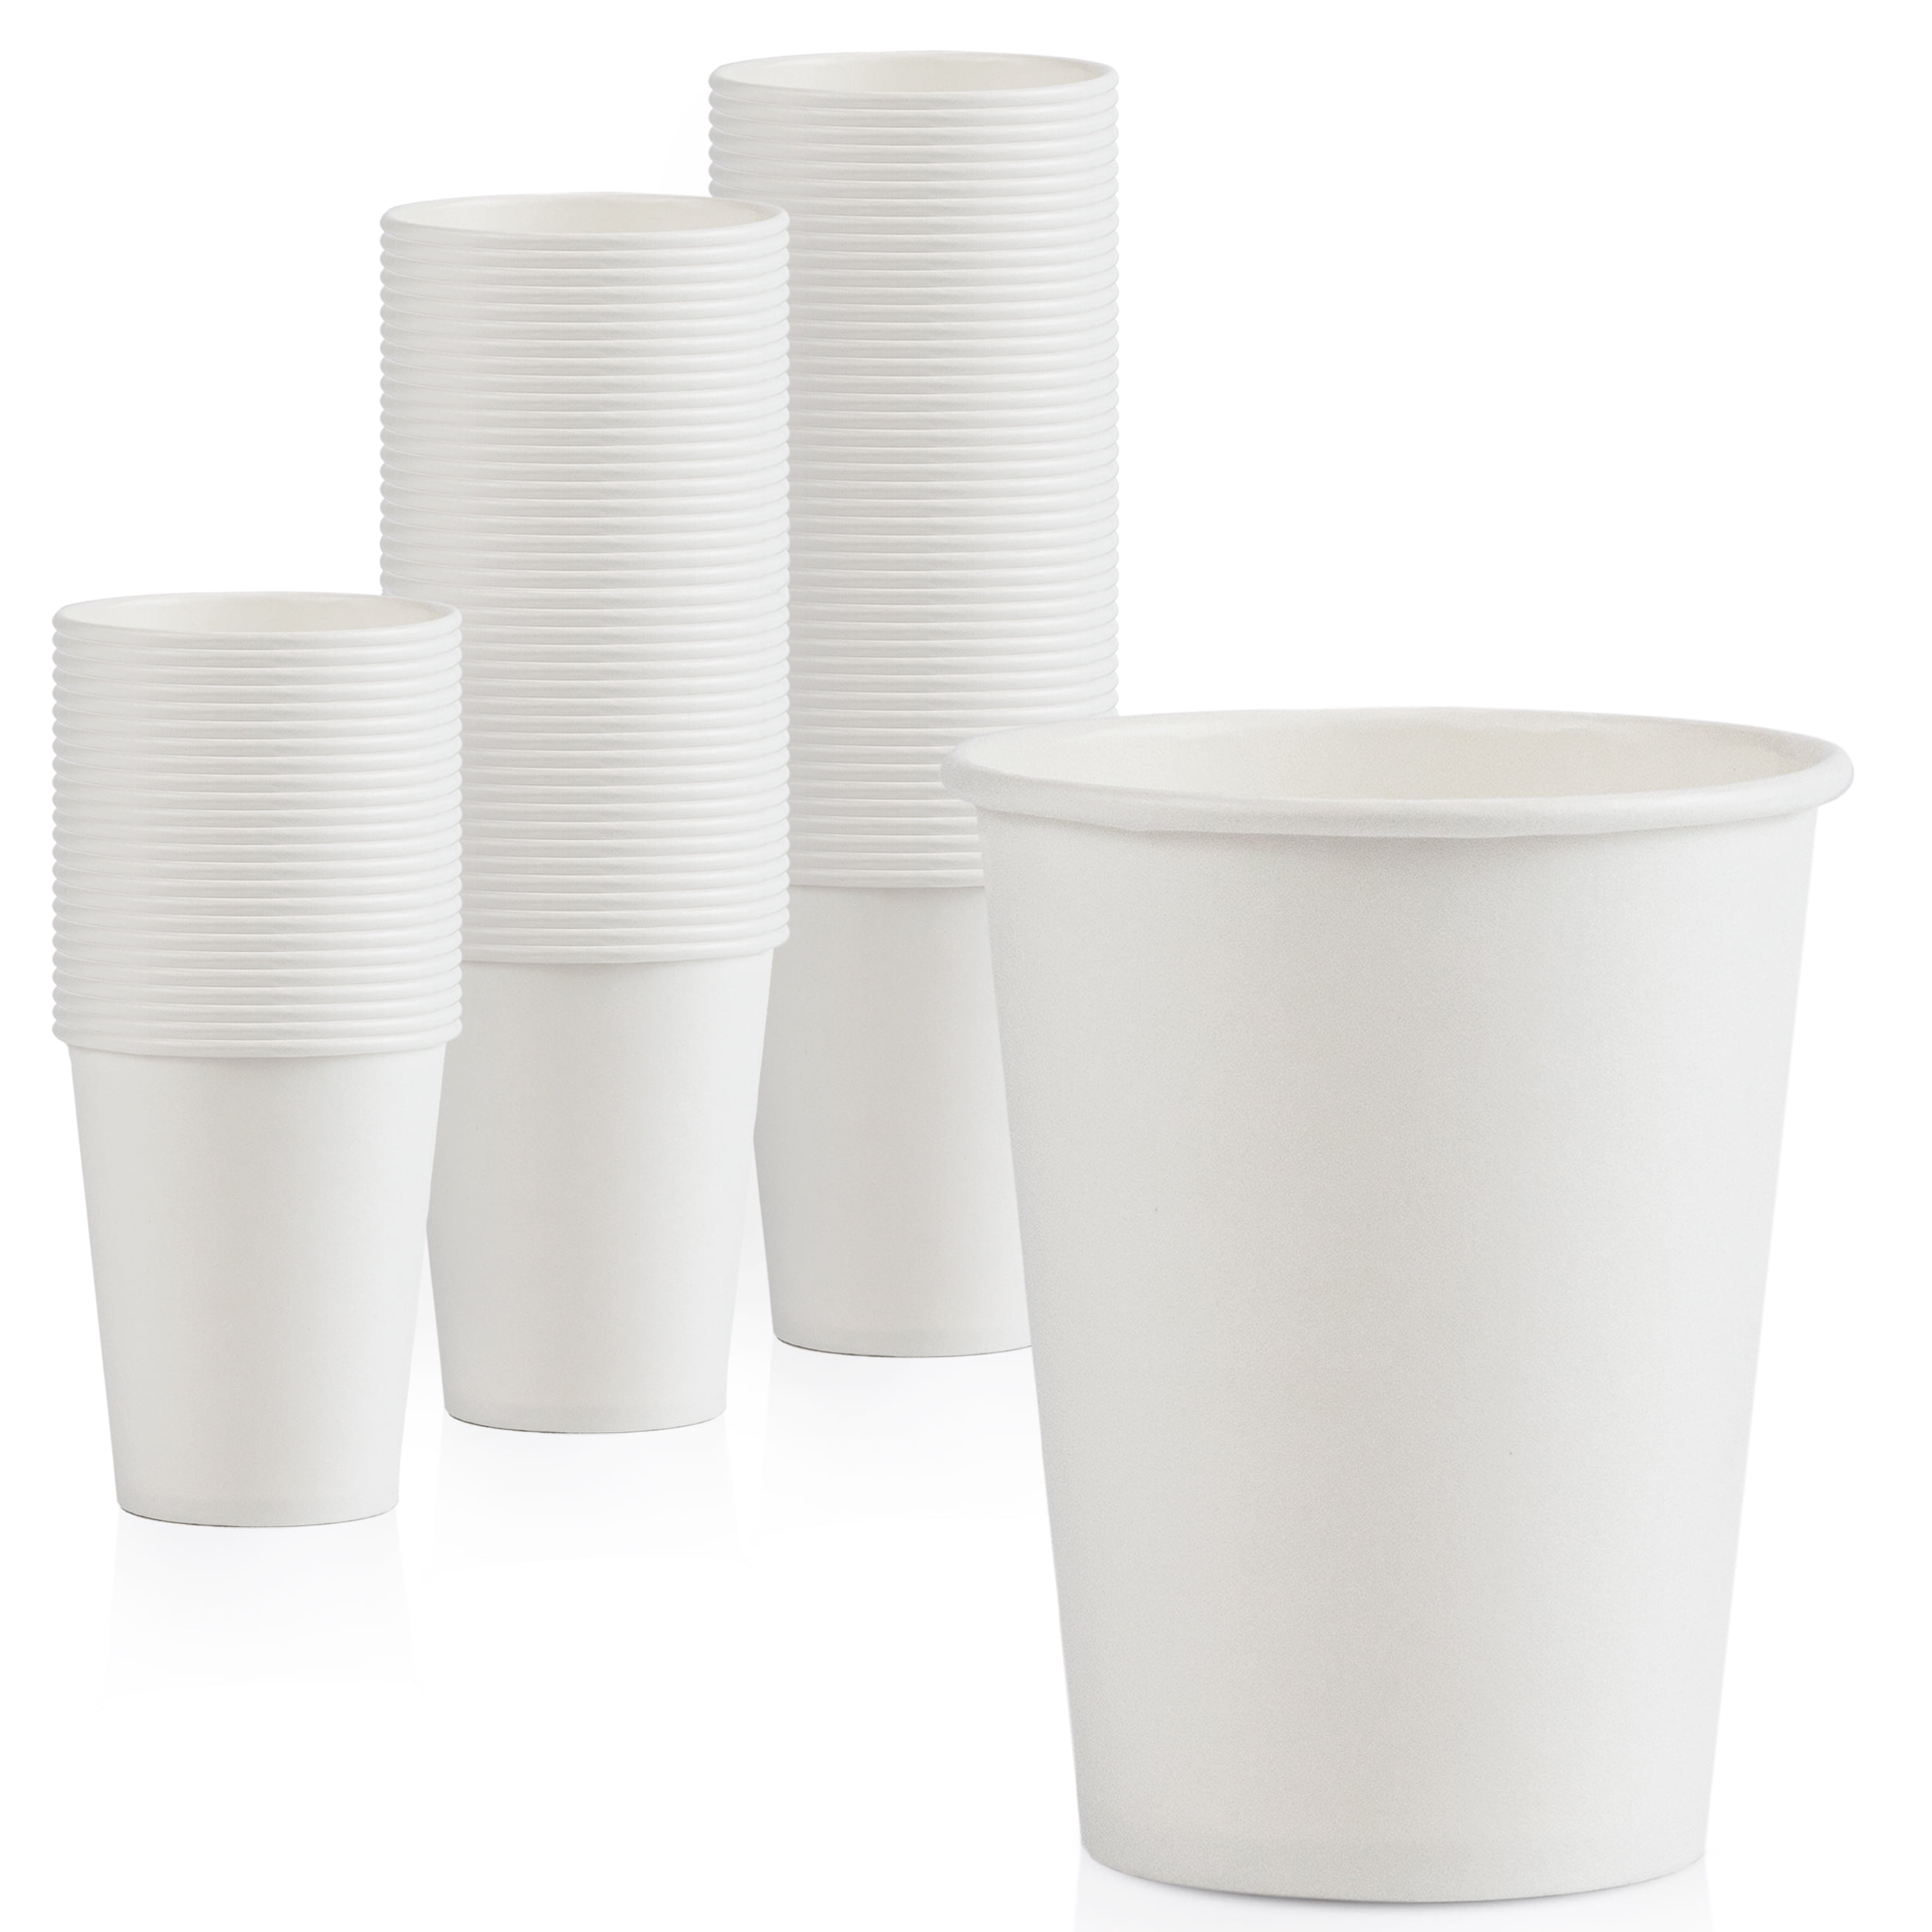 8oz Paper Cup Disposable White For Hot Cold Drinks 